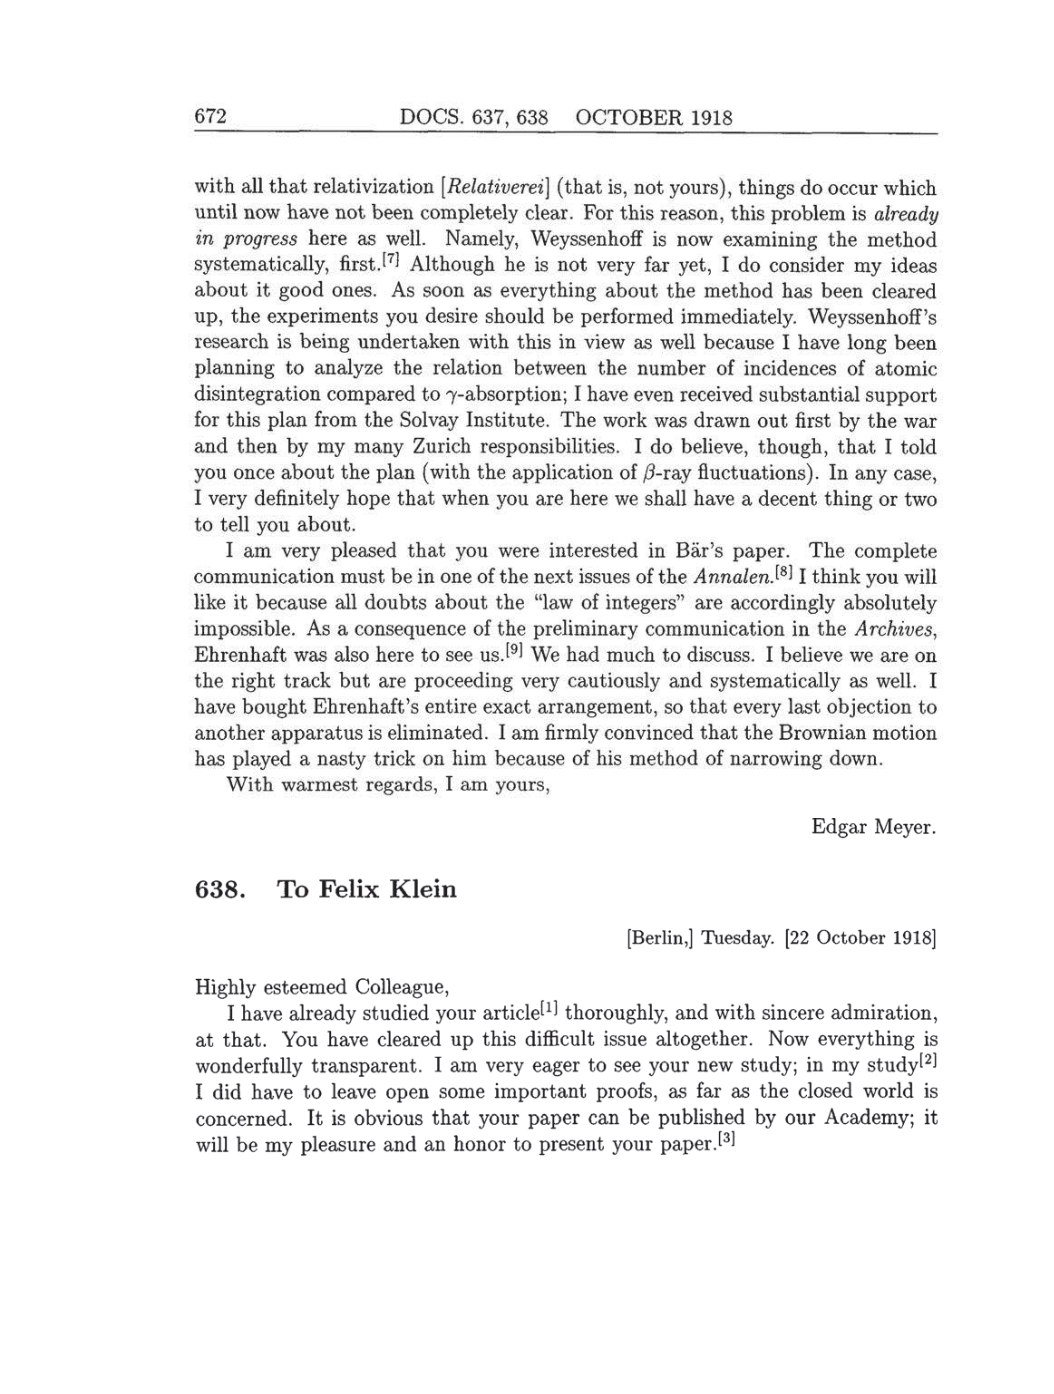 Volume 8: The Berlin Years: Correspondence, 1914-1918 (English translation supplement) page 672